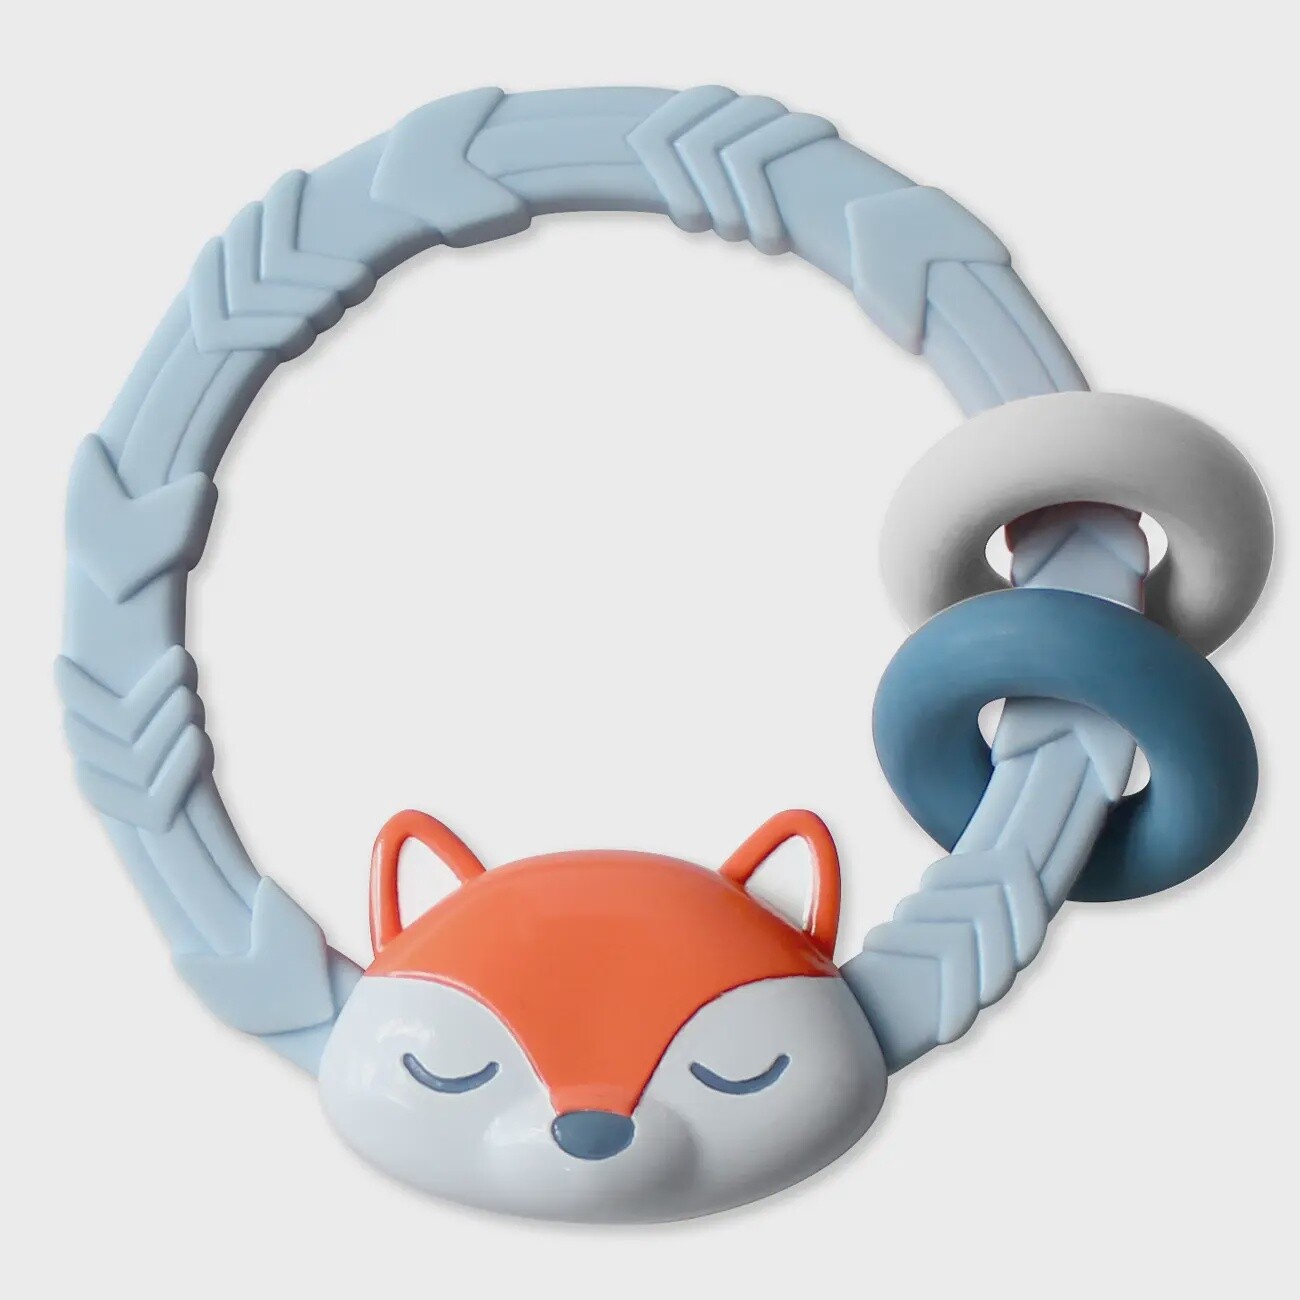 Itzy Ritzy Ritzy Rattle Silicone Teether Rattles (Fox)